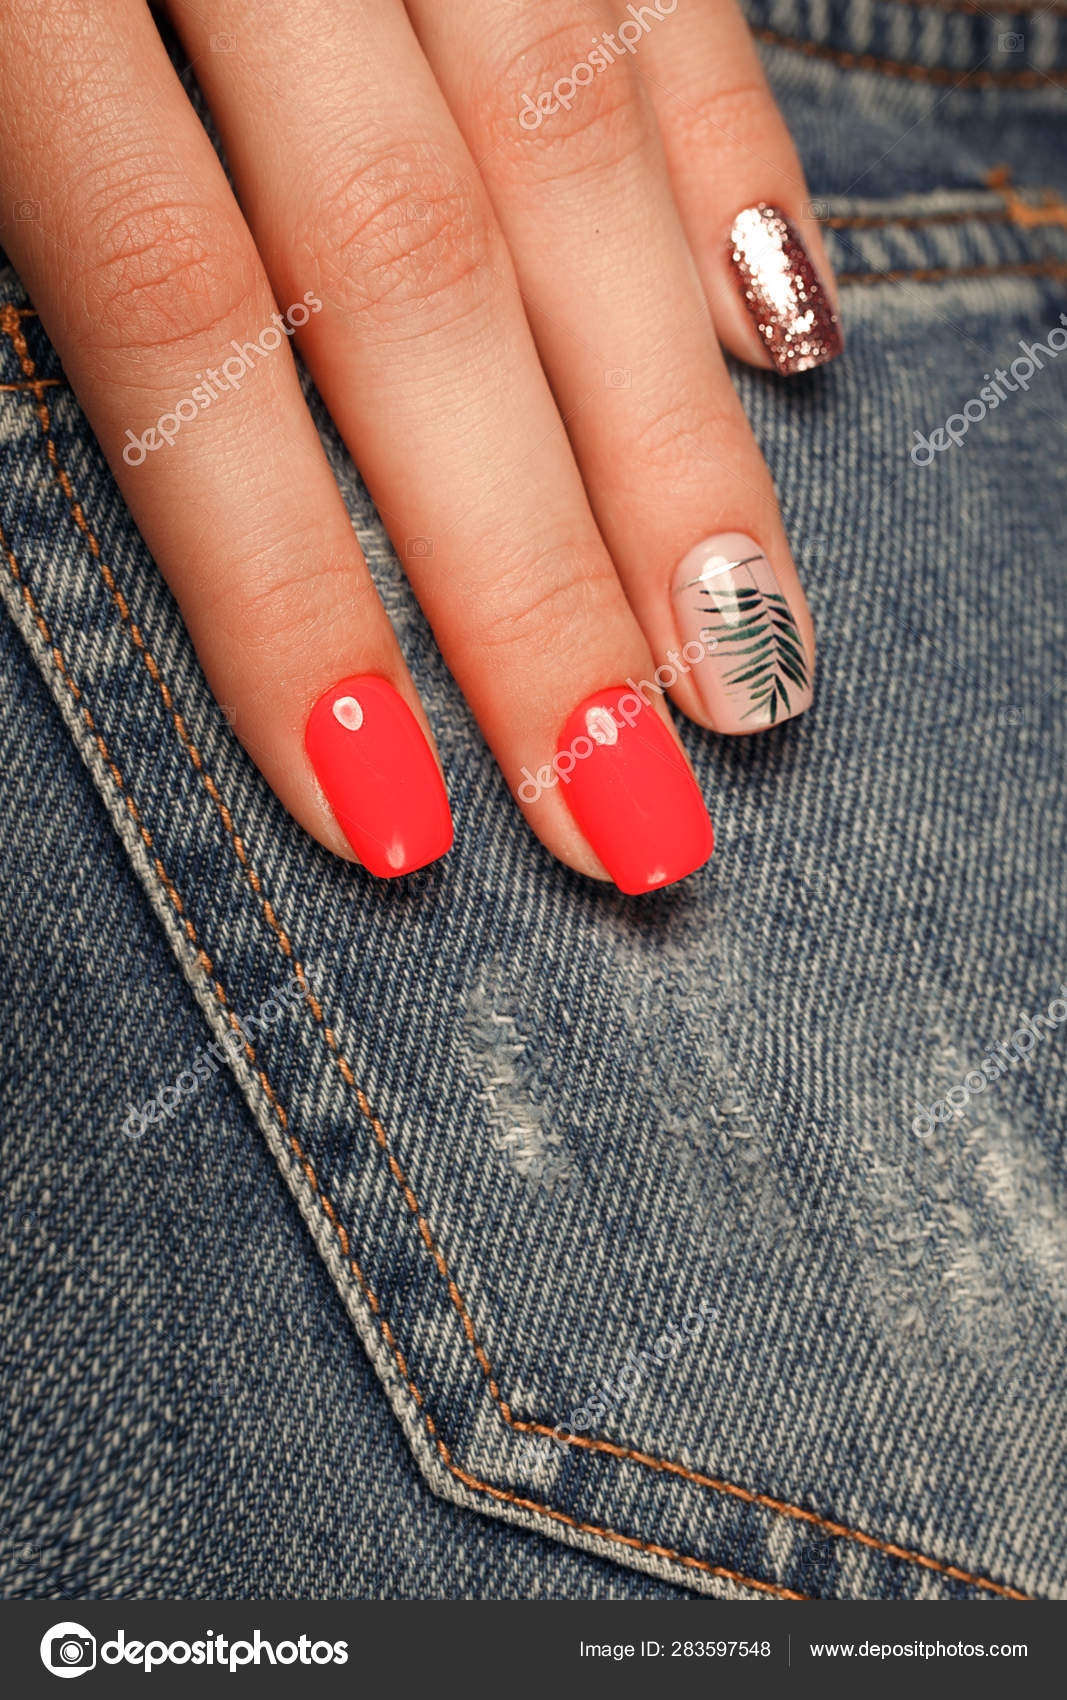 30 Light up Your Nails with Electric Energy for Summer : Orange & Red Swirl  Nails